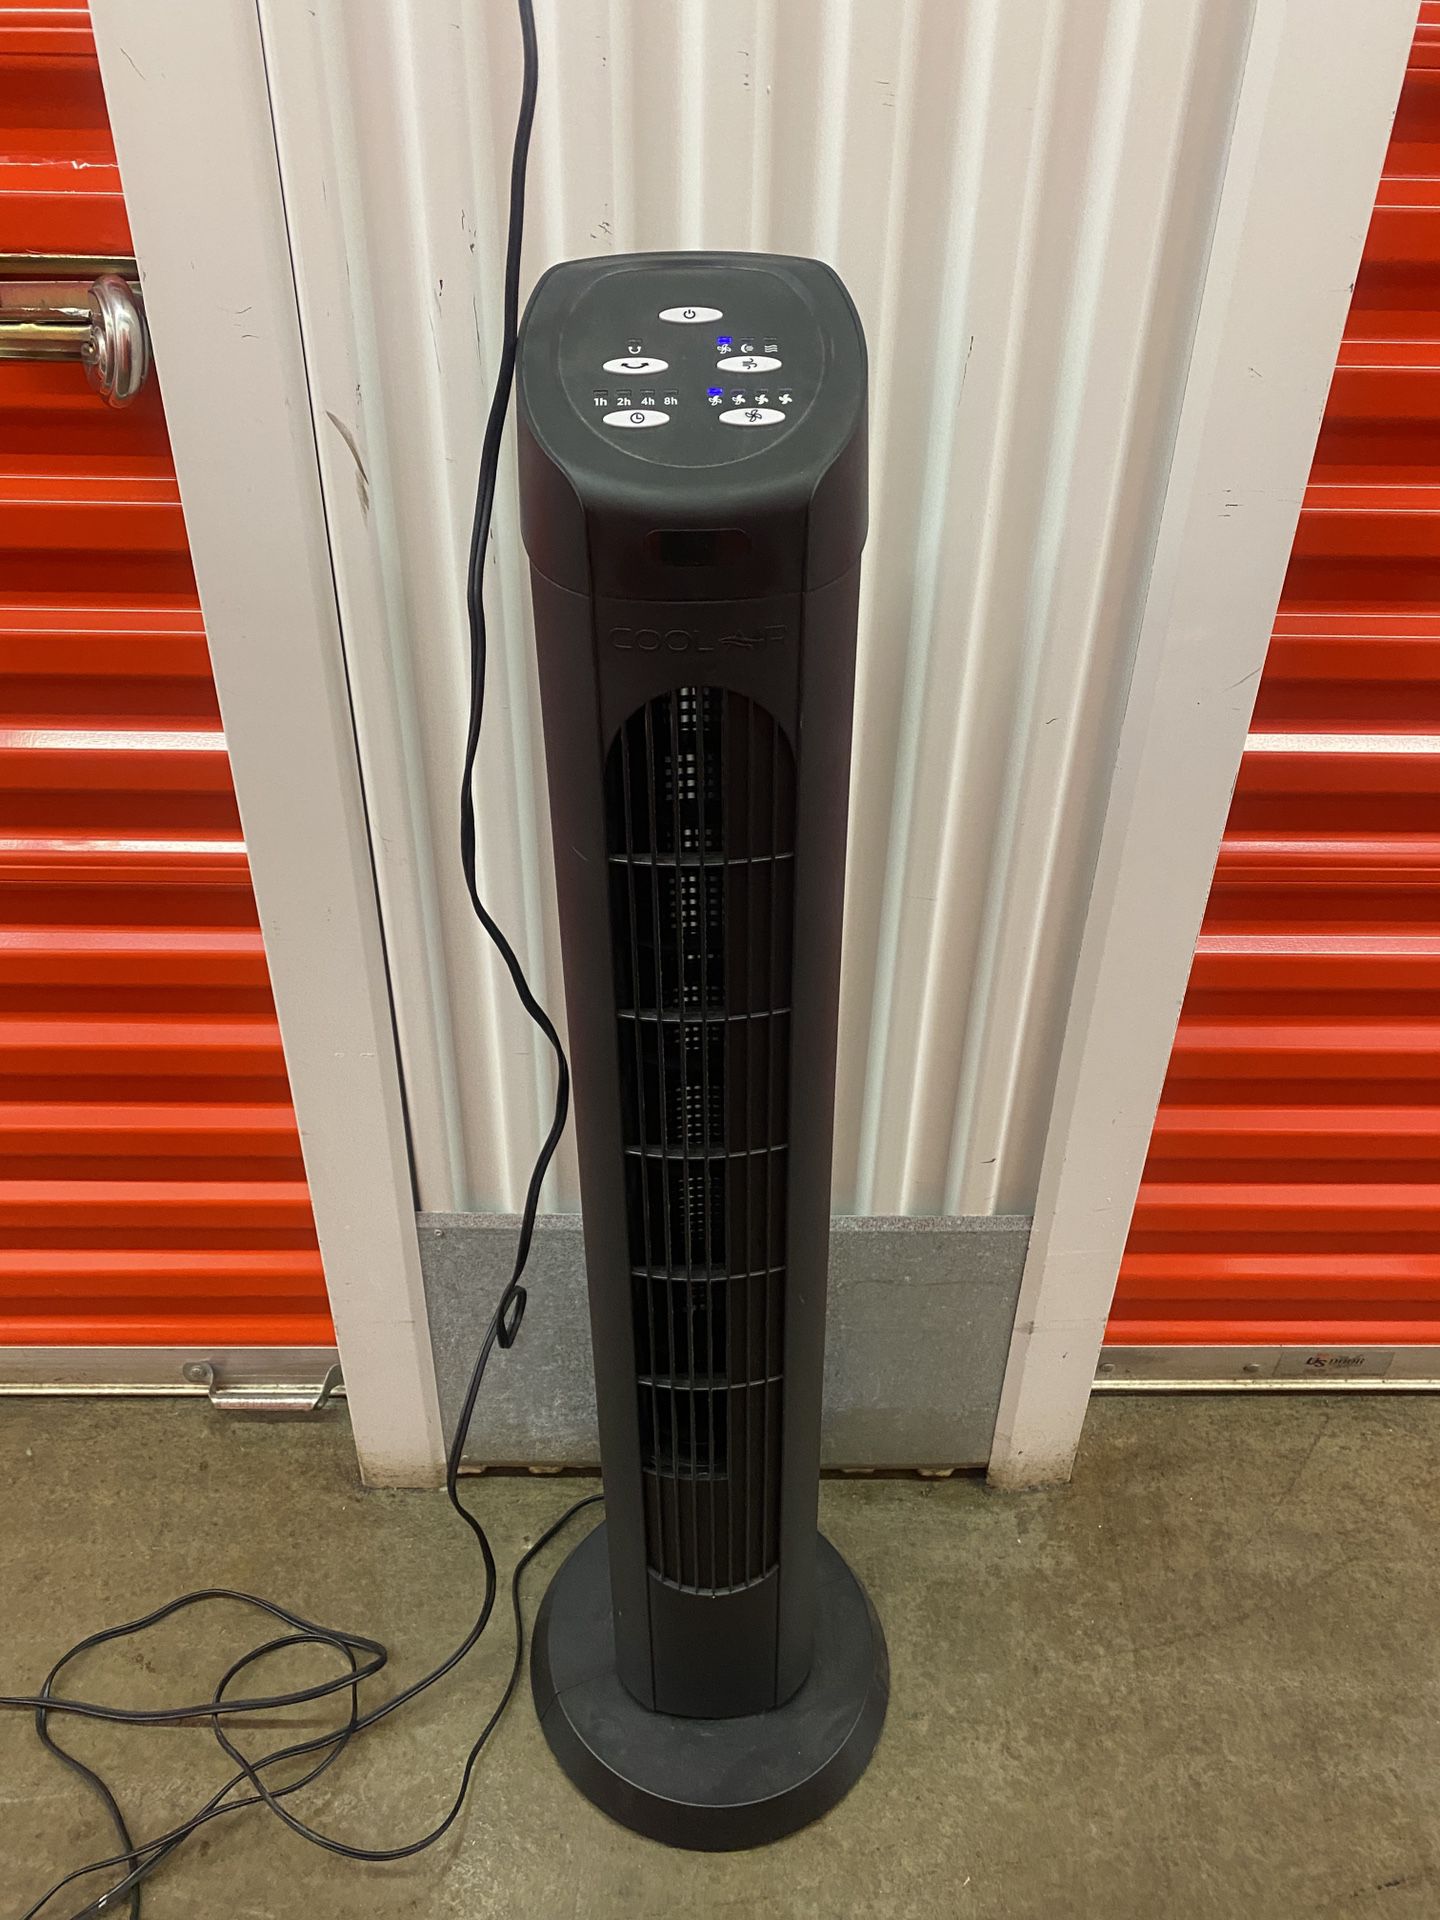 Cool Air Tower Fan For $35